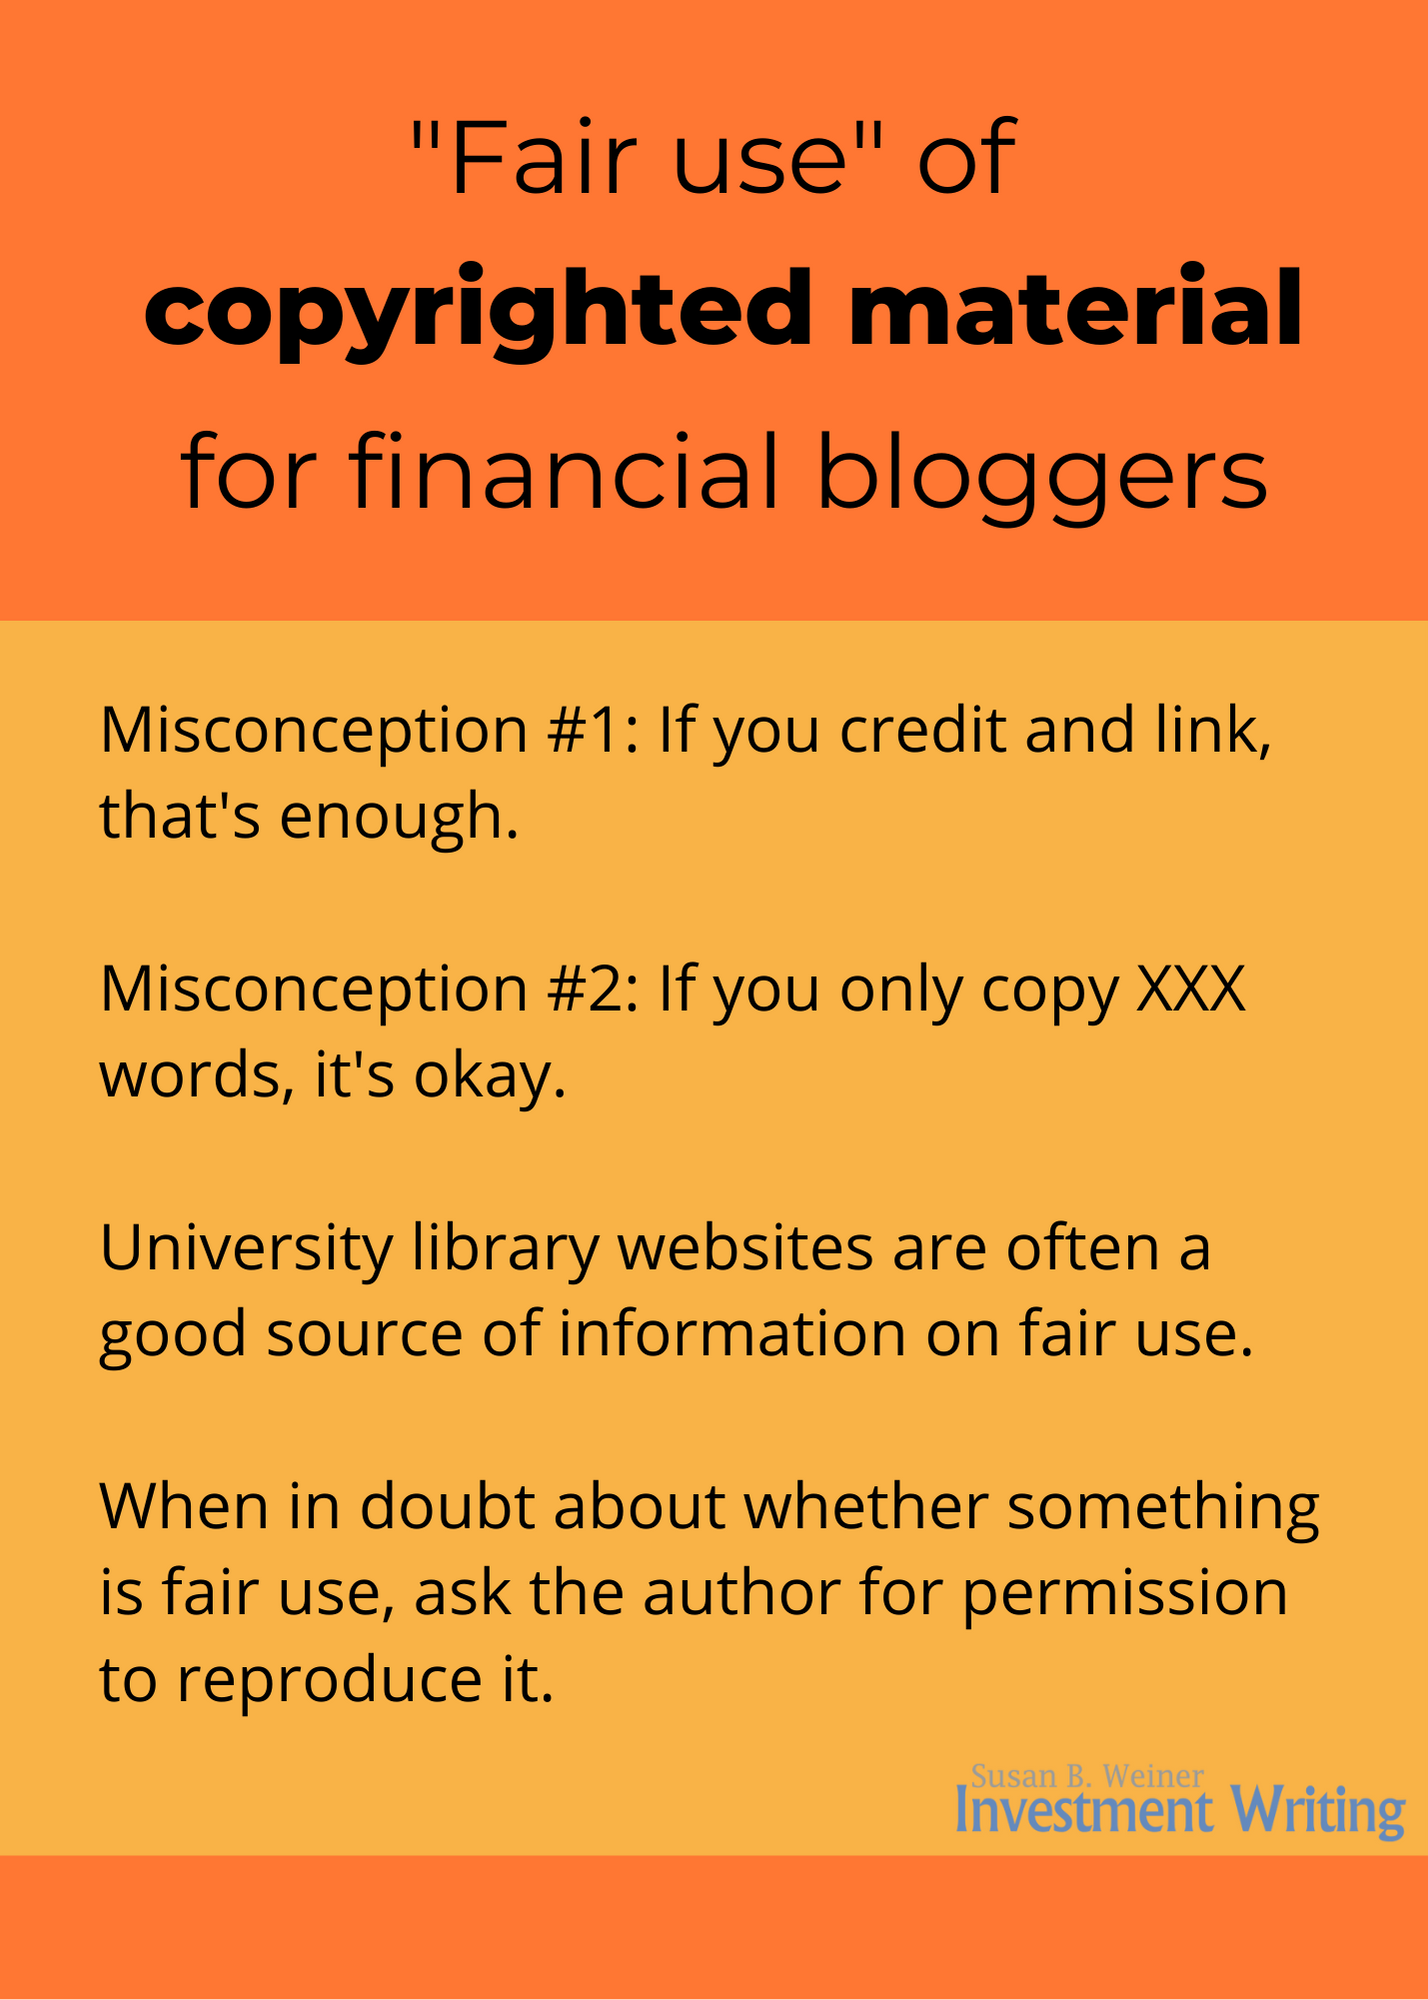 Fair use of copyrighted material infographic